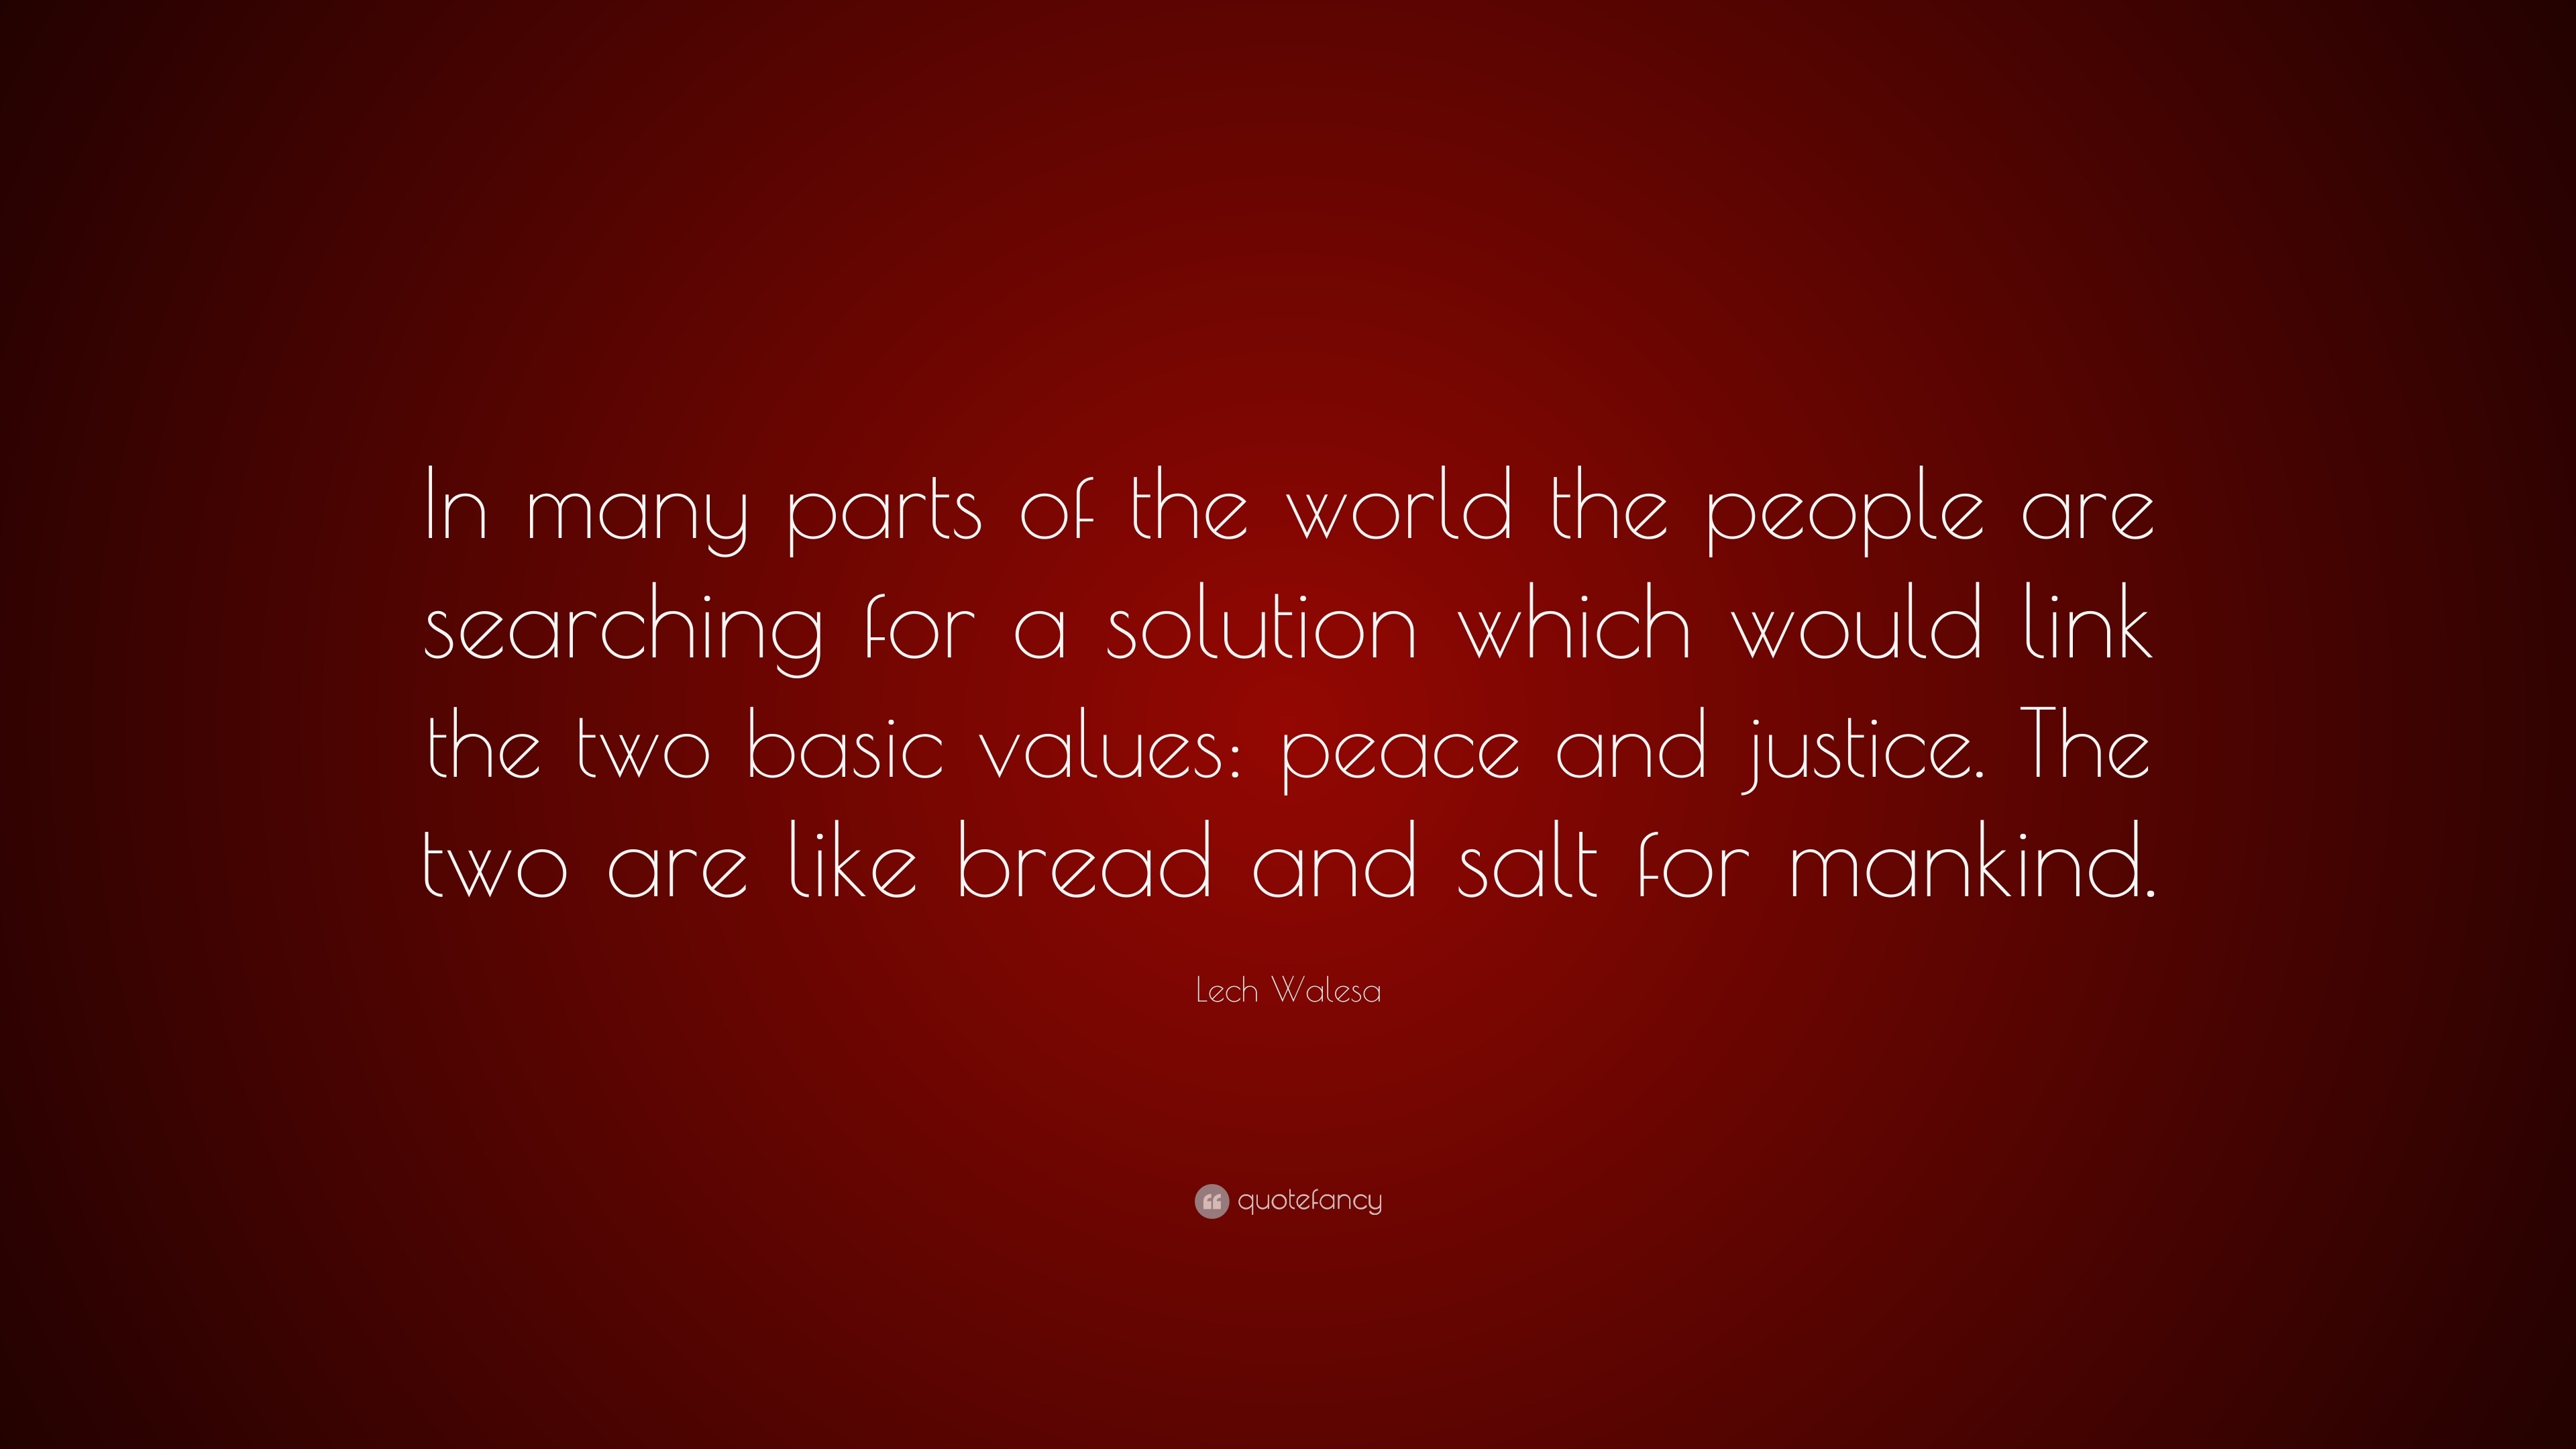 Lech Walesa Quote: "In many parts of the world the people are searching for a solution which ...